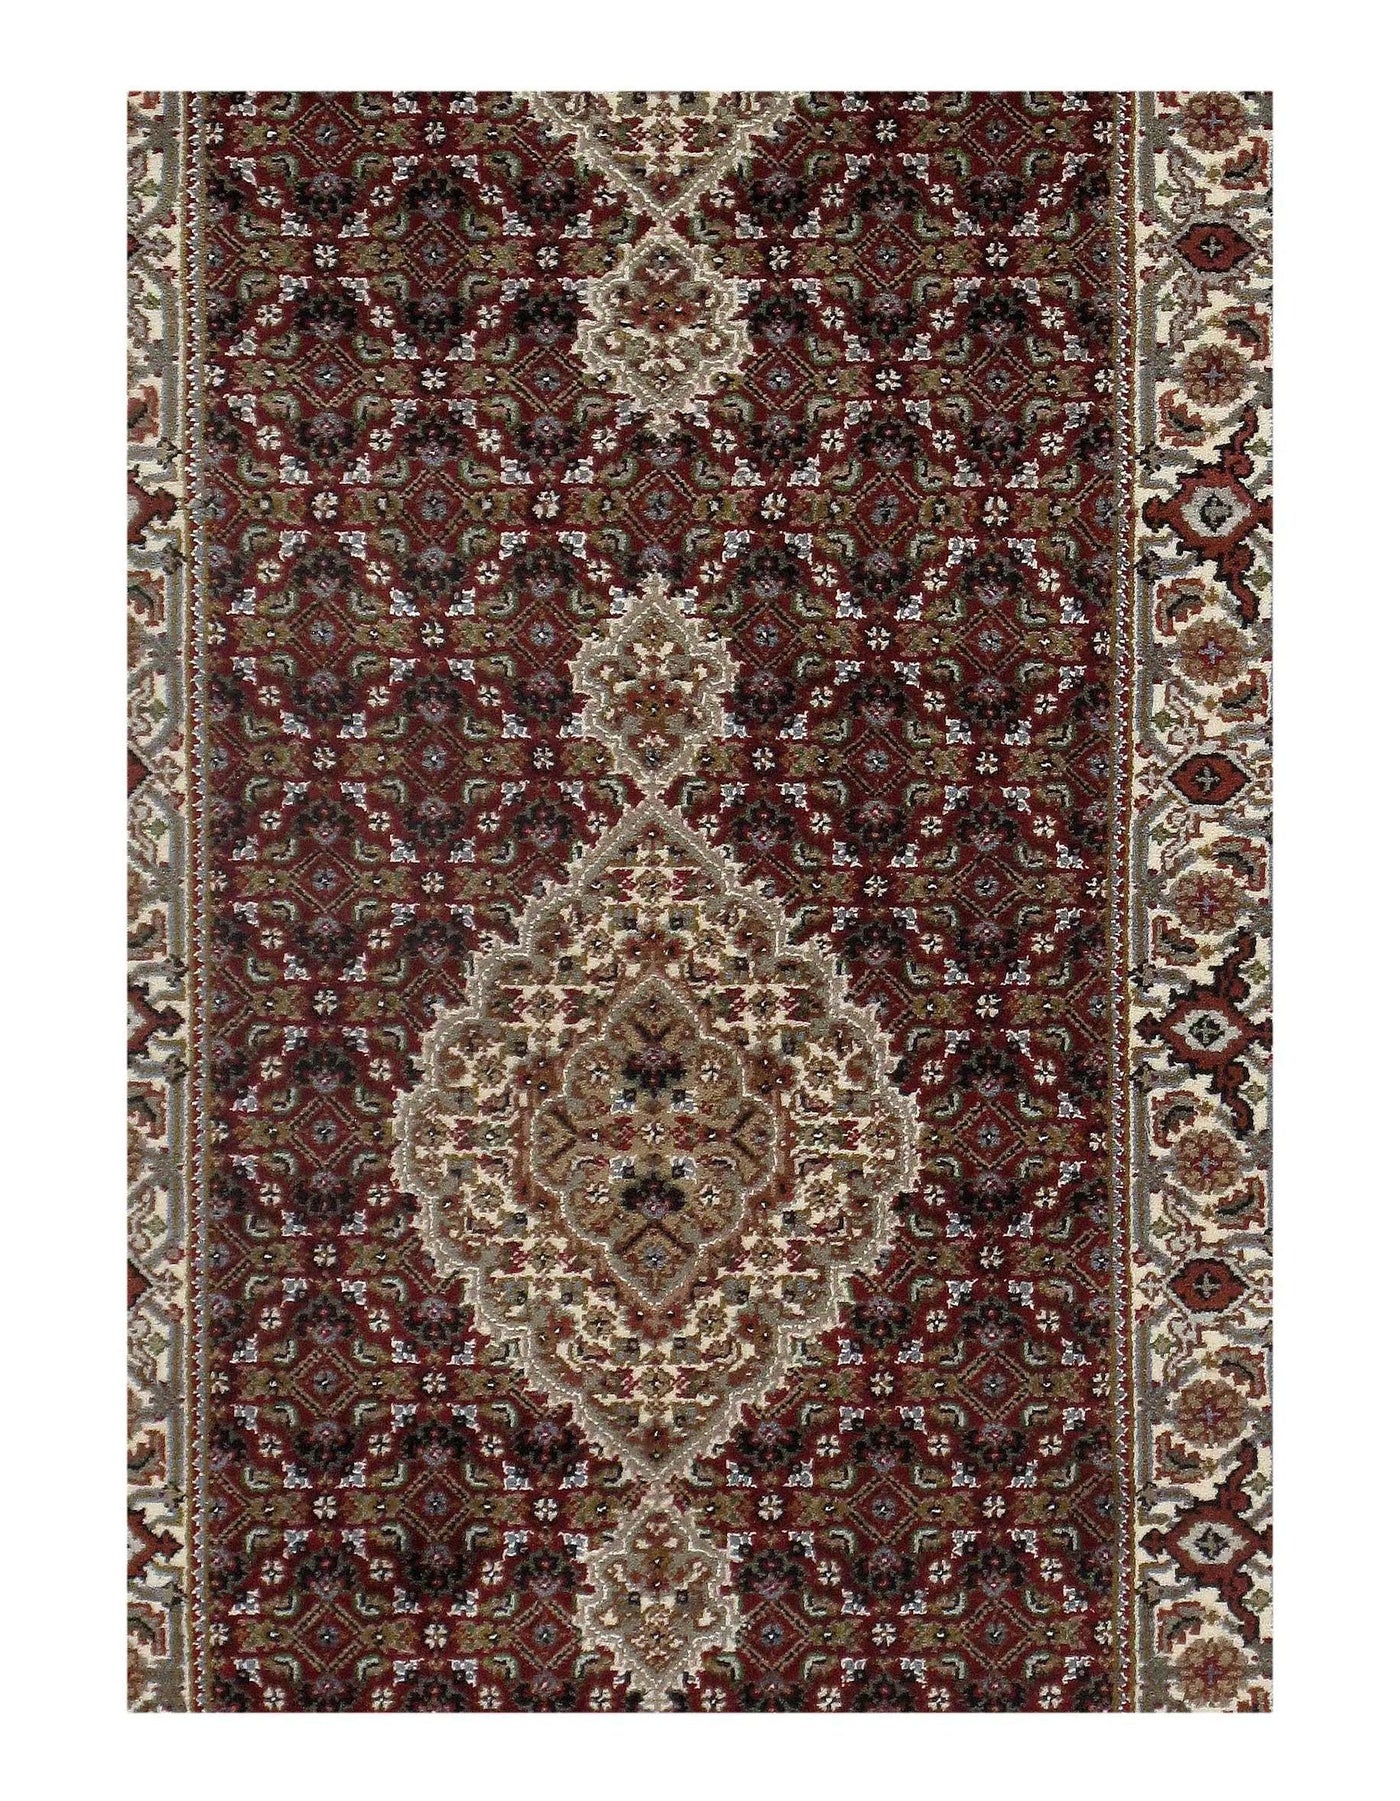 Traditional Tabriz Design Hand-Knotted Runner - 2'8" X 22'6"